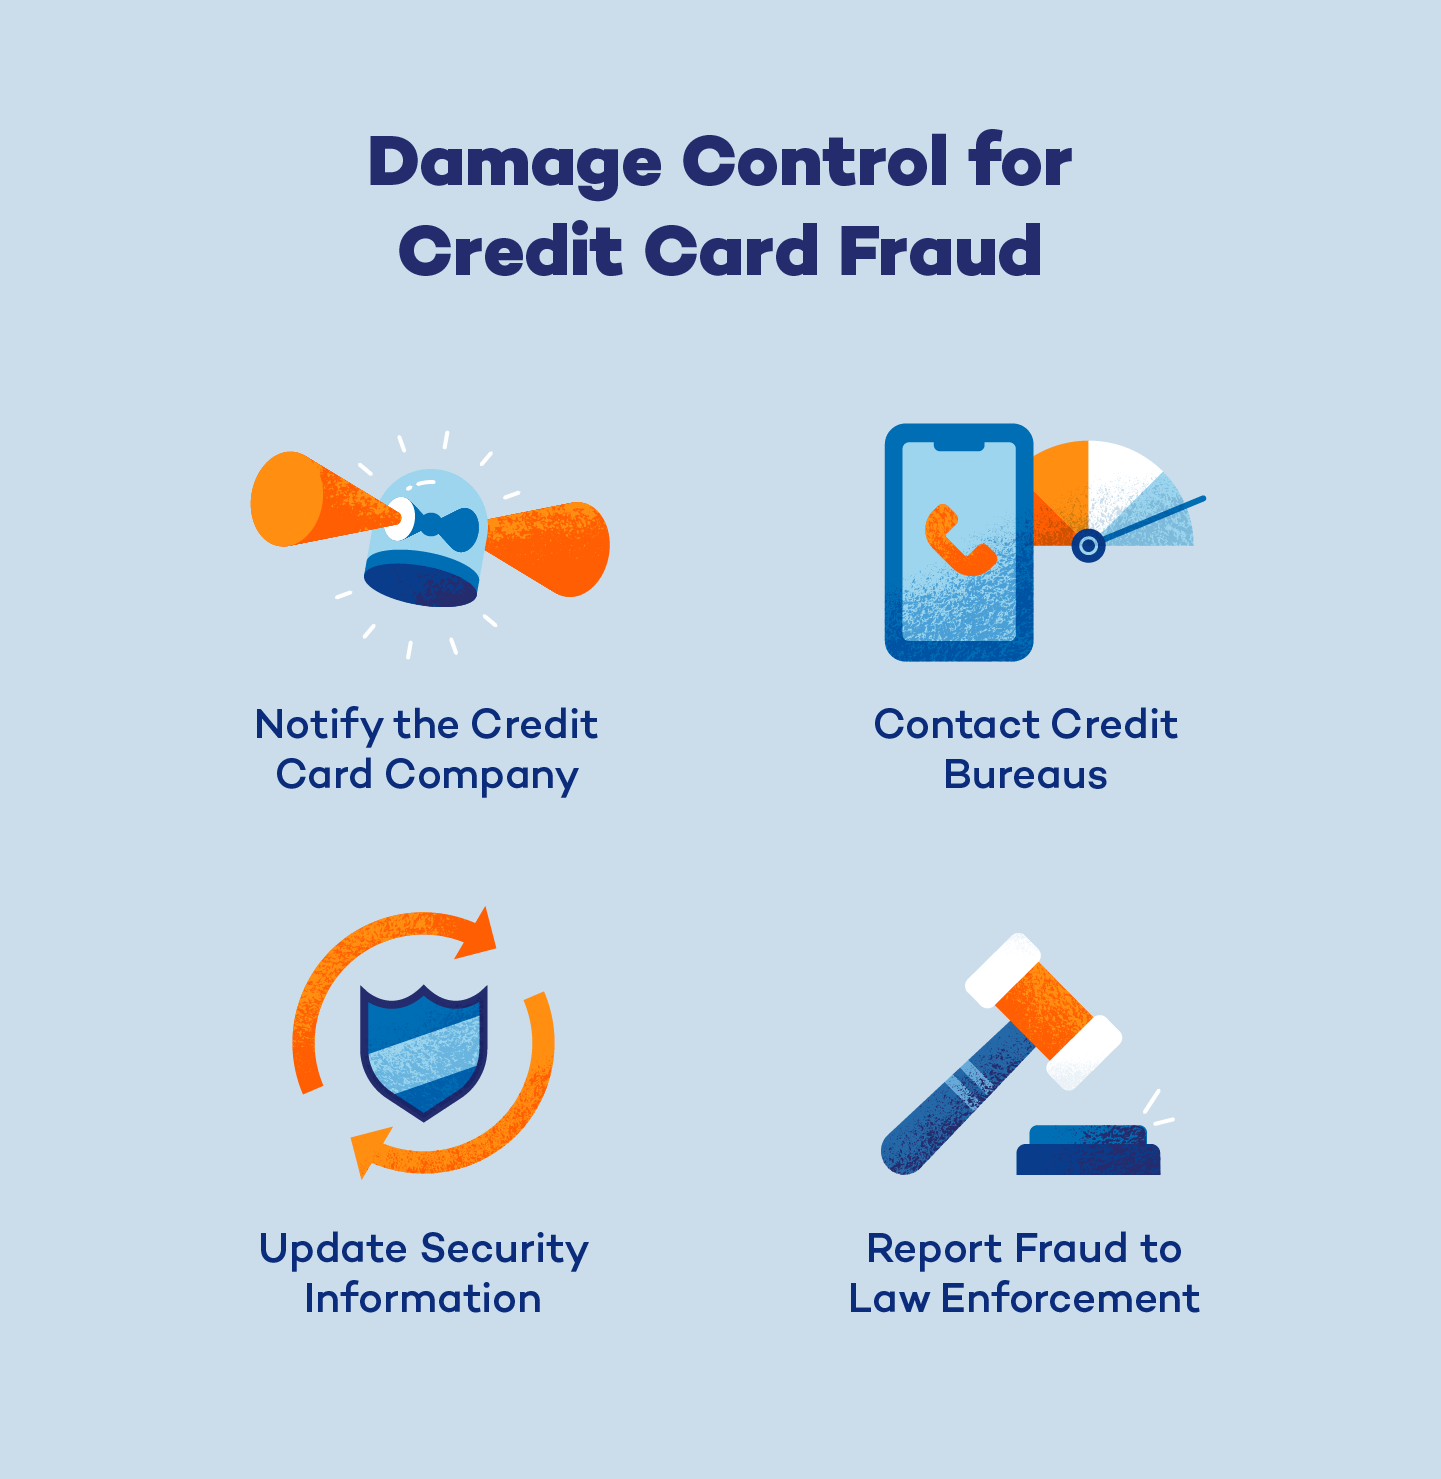 Reporting fraud and updating security measures are a few ways to control damage from credit card fraud.